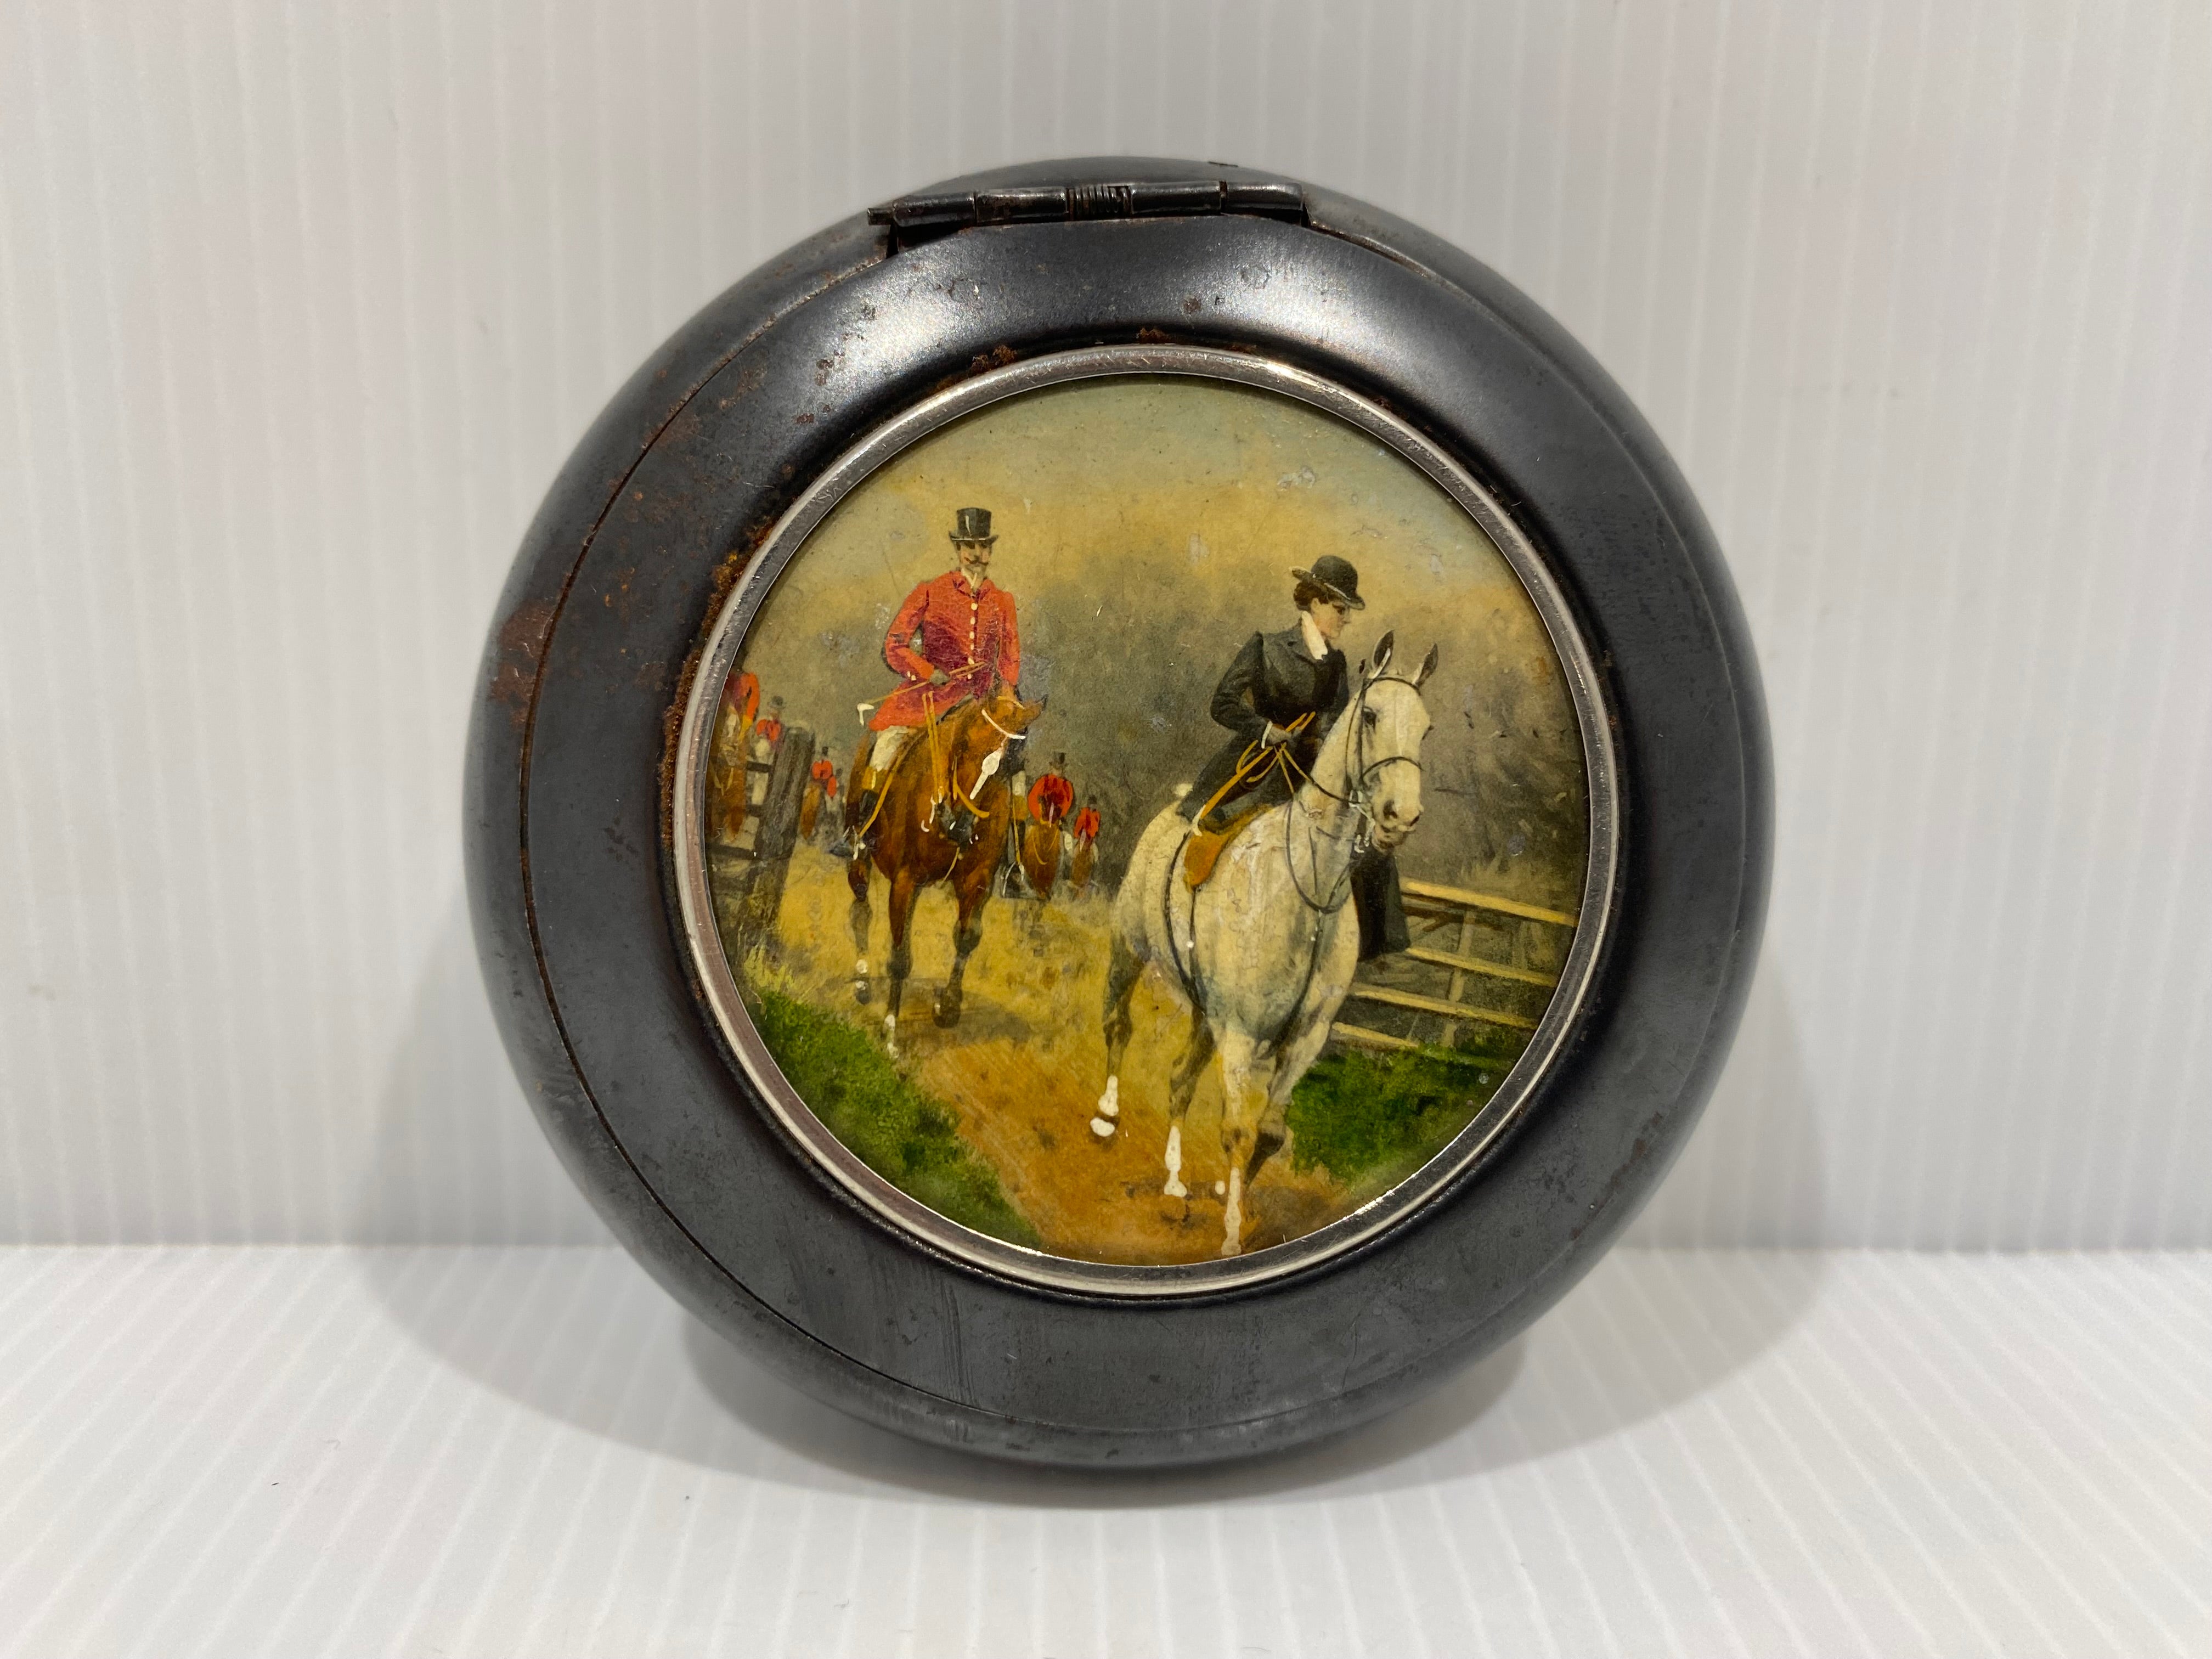 Metallic snuff box, with a hand-painted hunting scene.